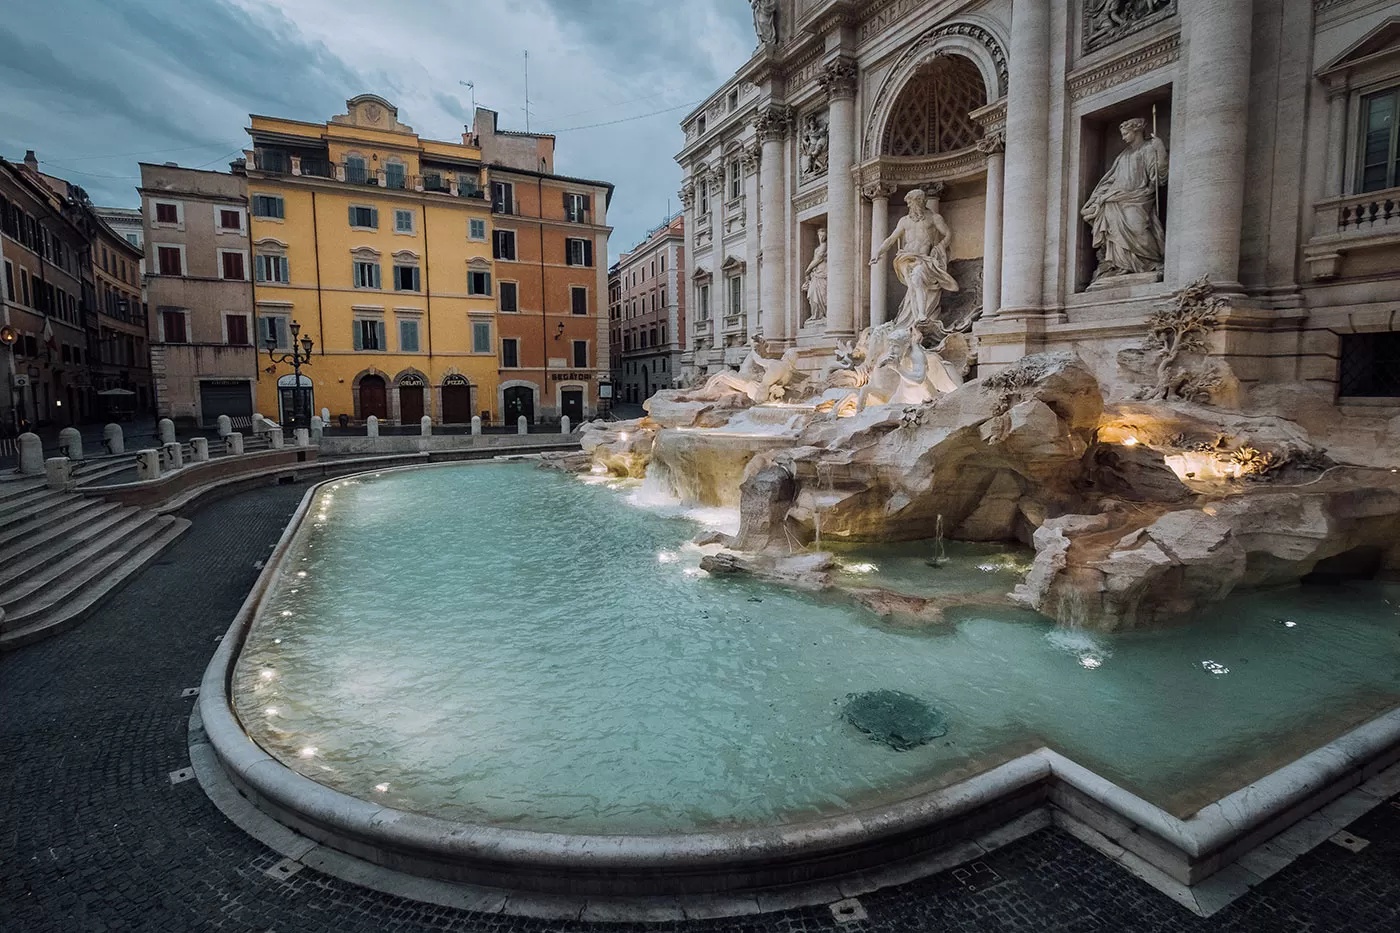 BEST HOTELS Near the Trevi Fountain in Rome - Trevi Fountain no crowds at dawn